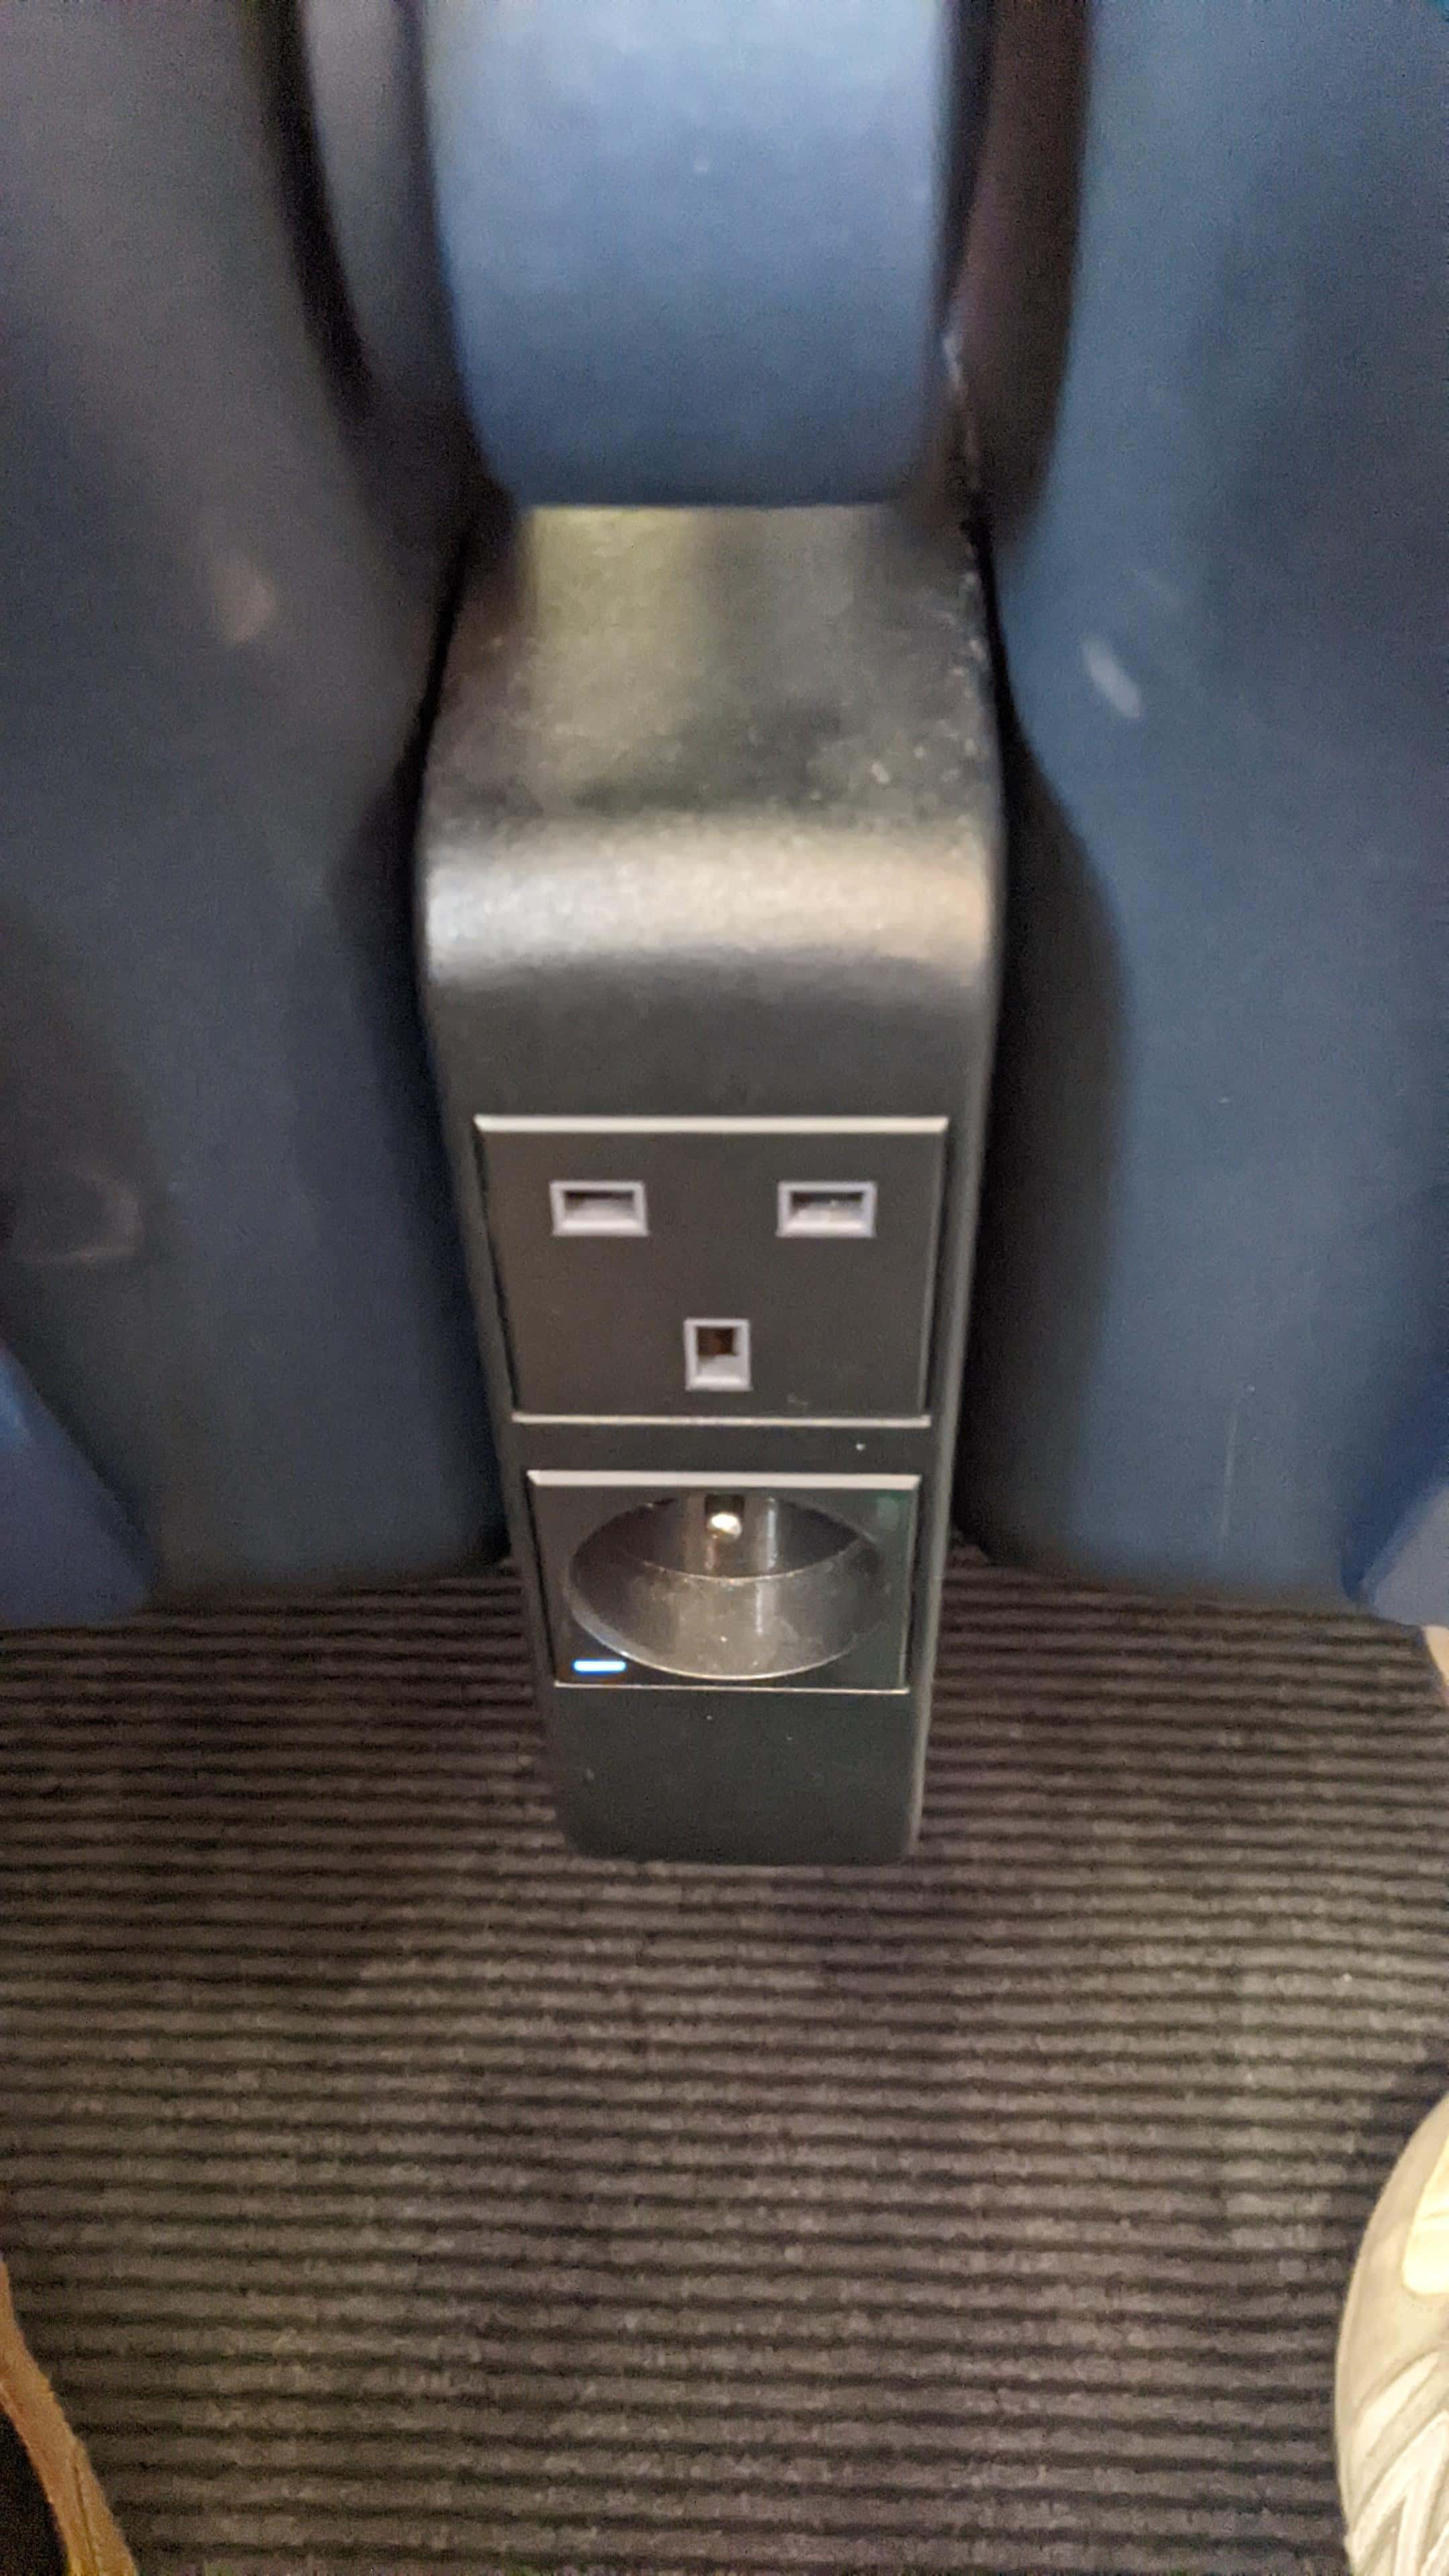 Plug sockets (one UK three pin and one European two pin) on a Eurostar train